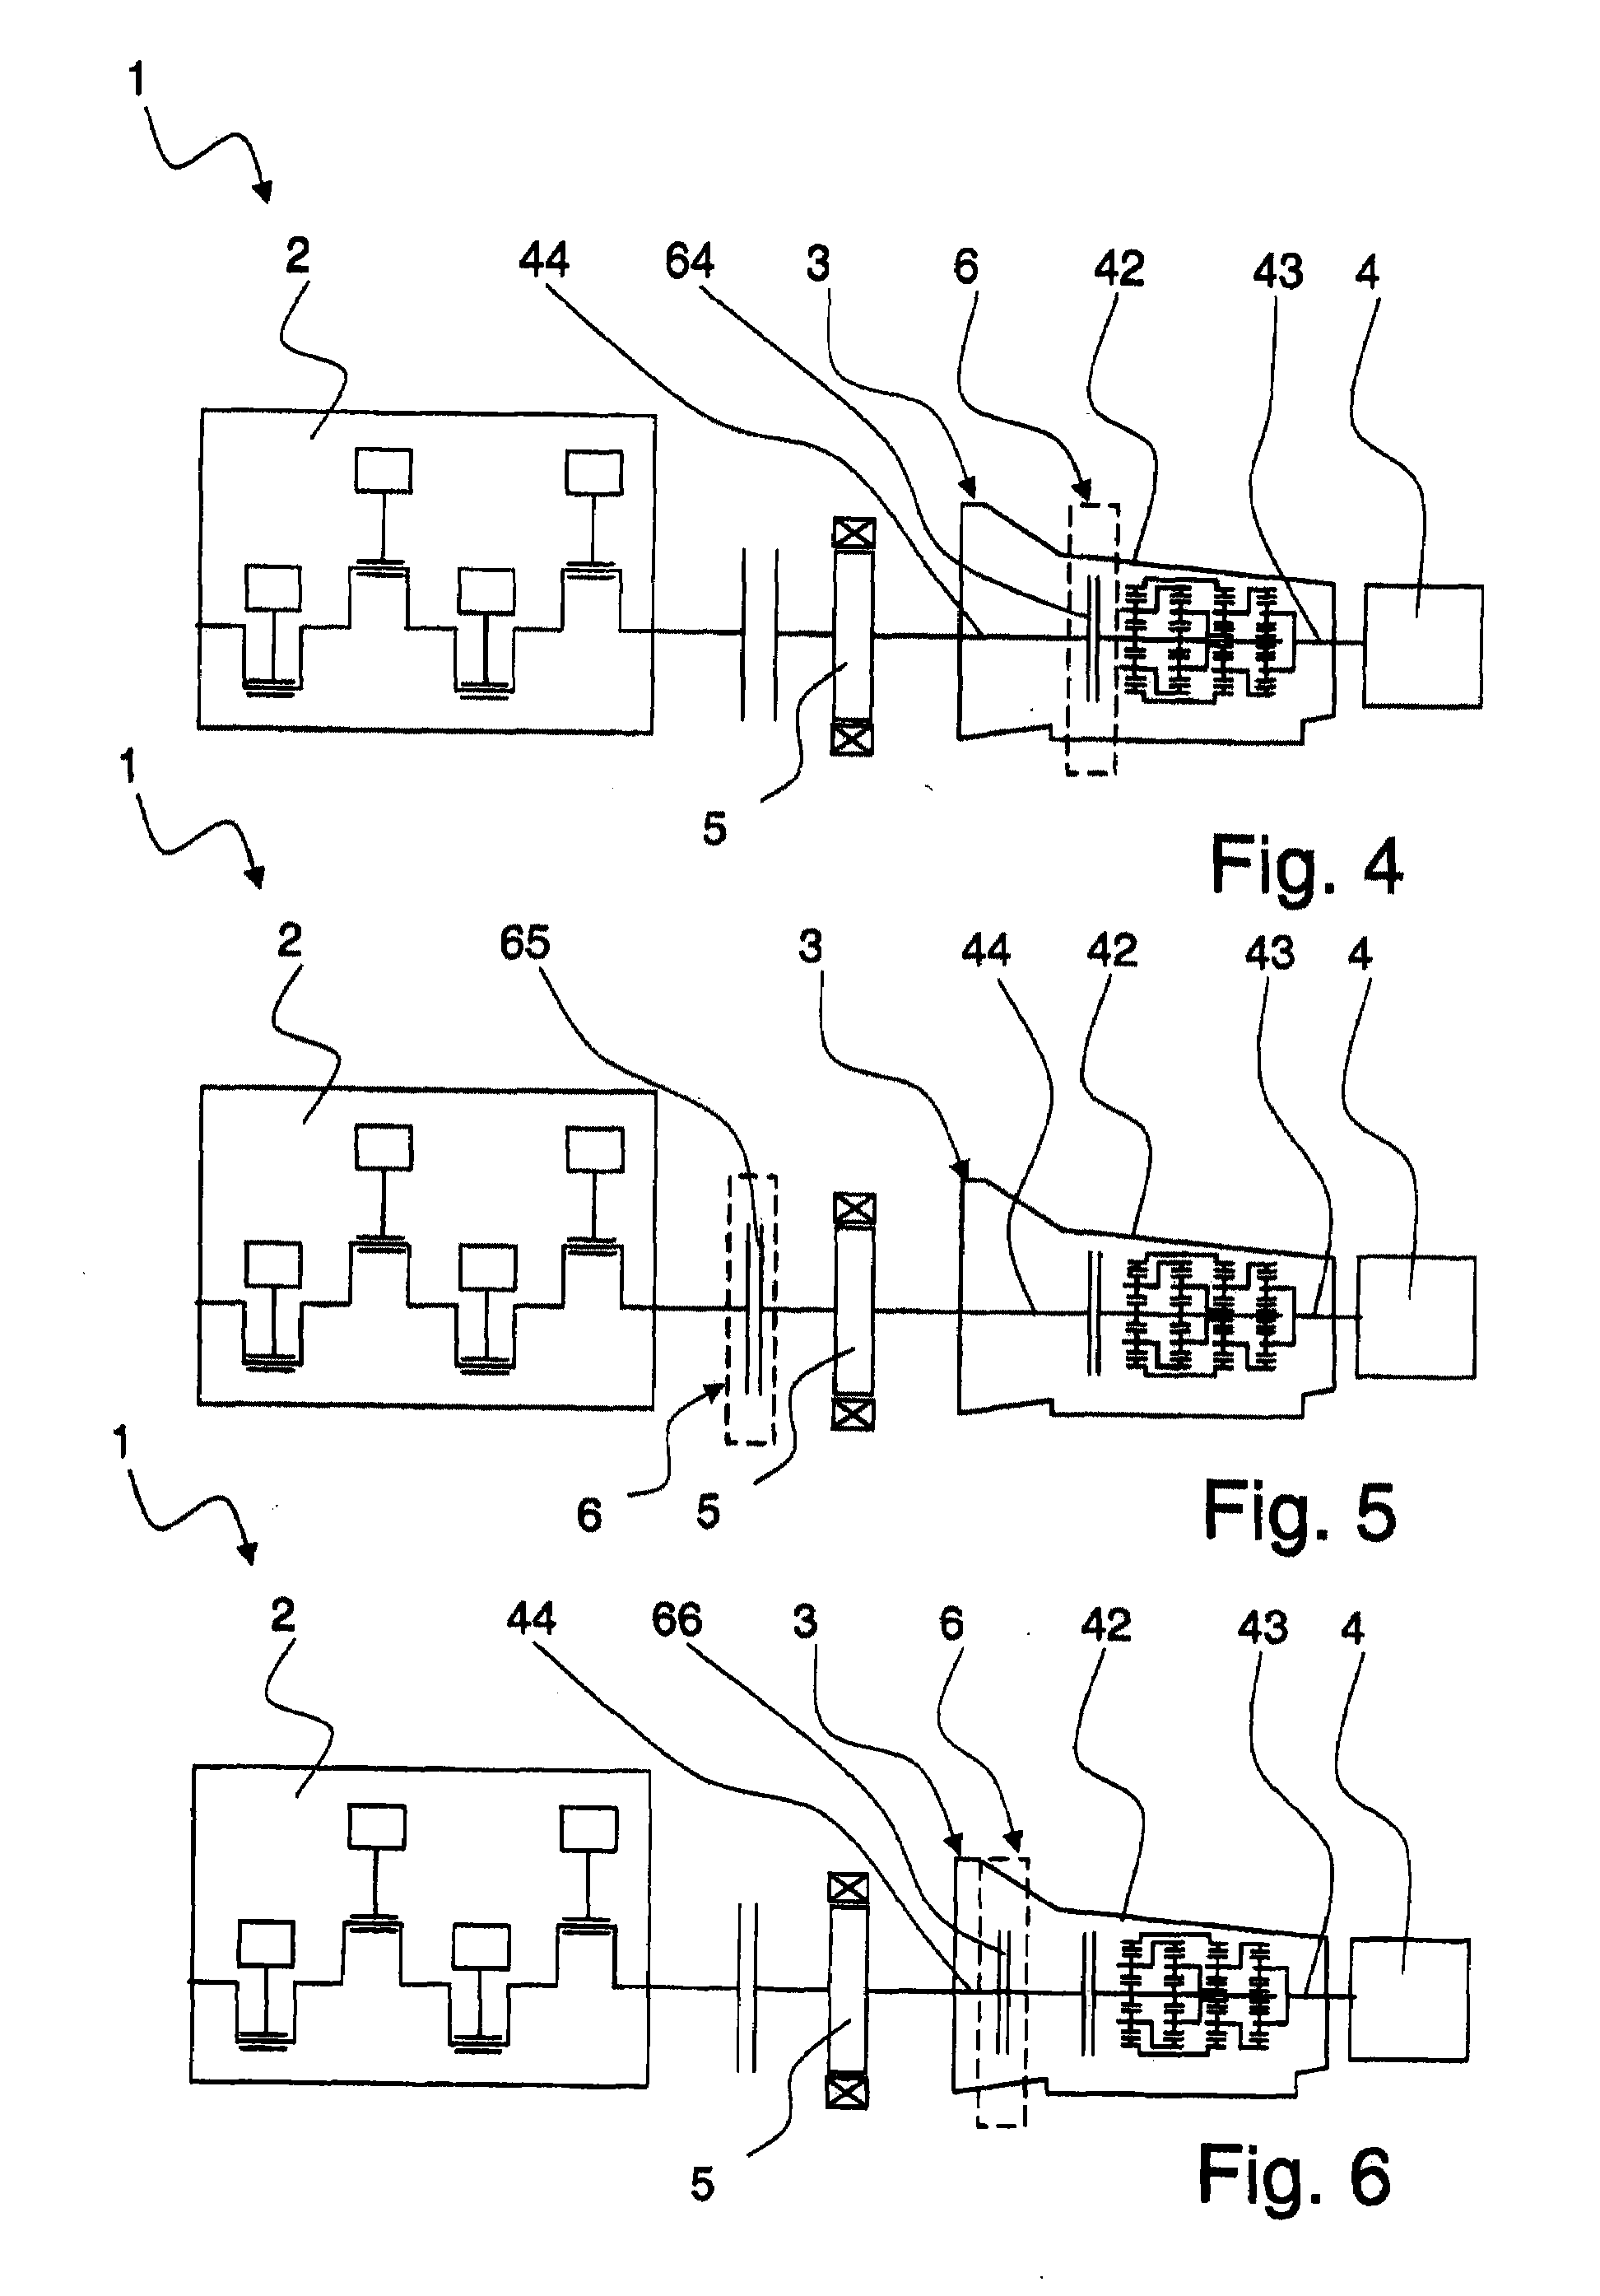 Electrohydraulic transmission controller, transmission device, and a motor vehicle drive train